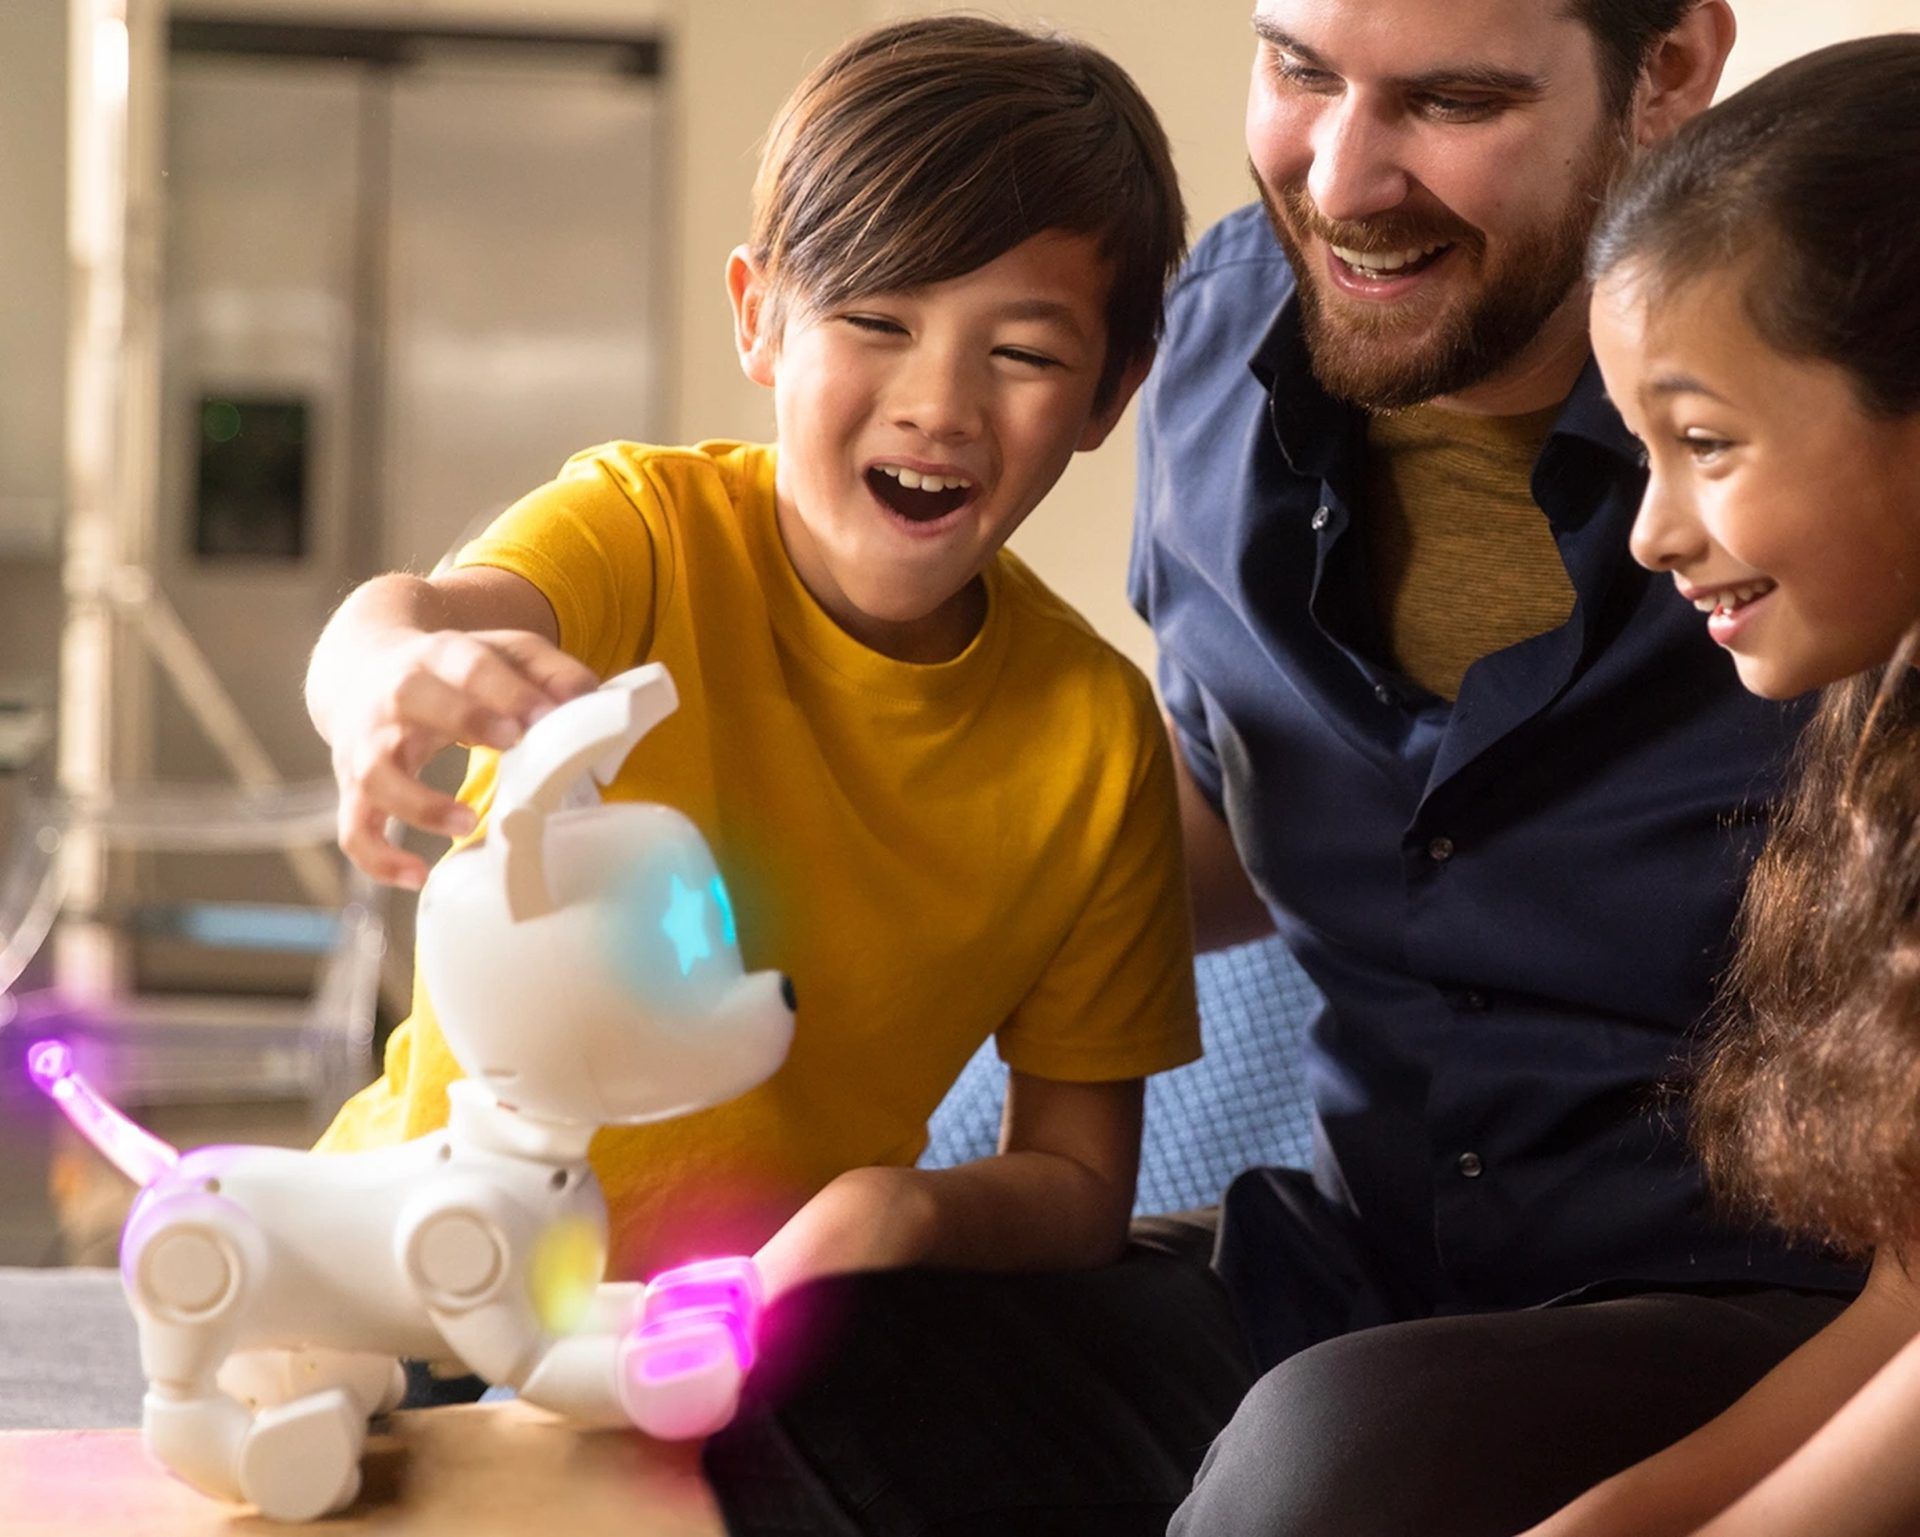 CES 2023 robots, CES 2023 smart home techs, and CES 2023 top products are here! We summarized the CES 2023 highlights for you. 